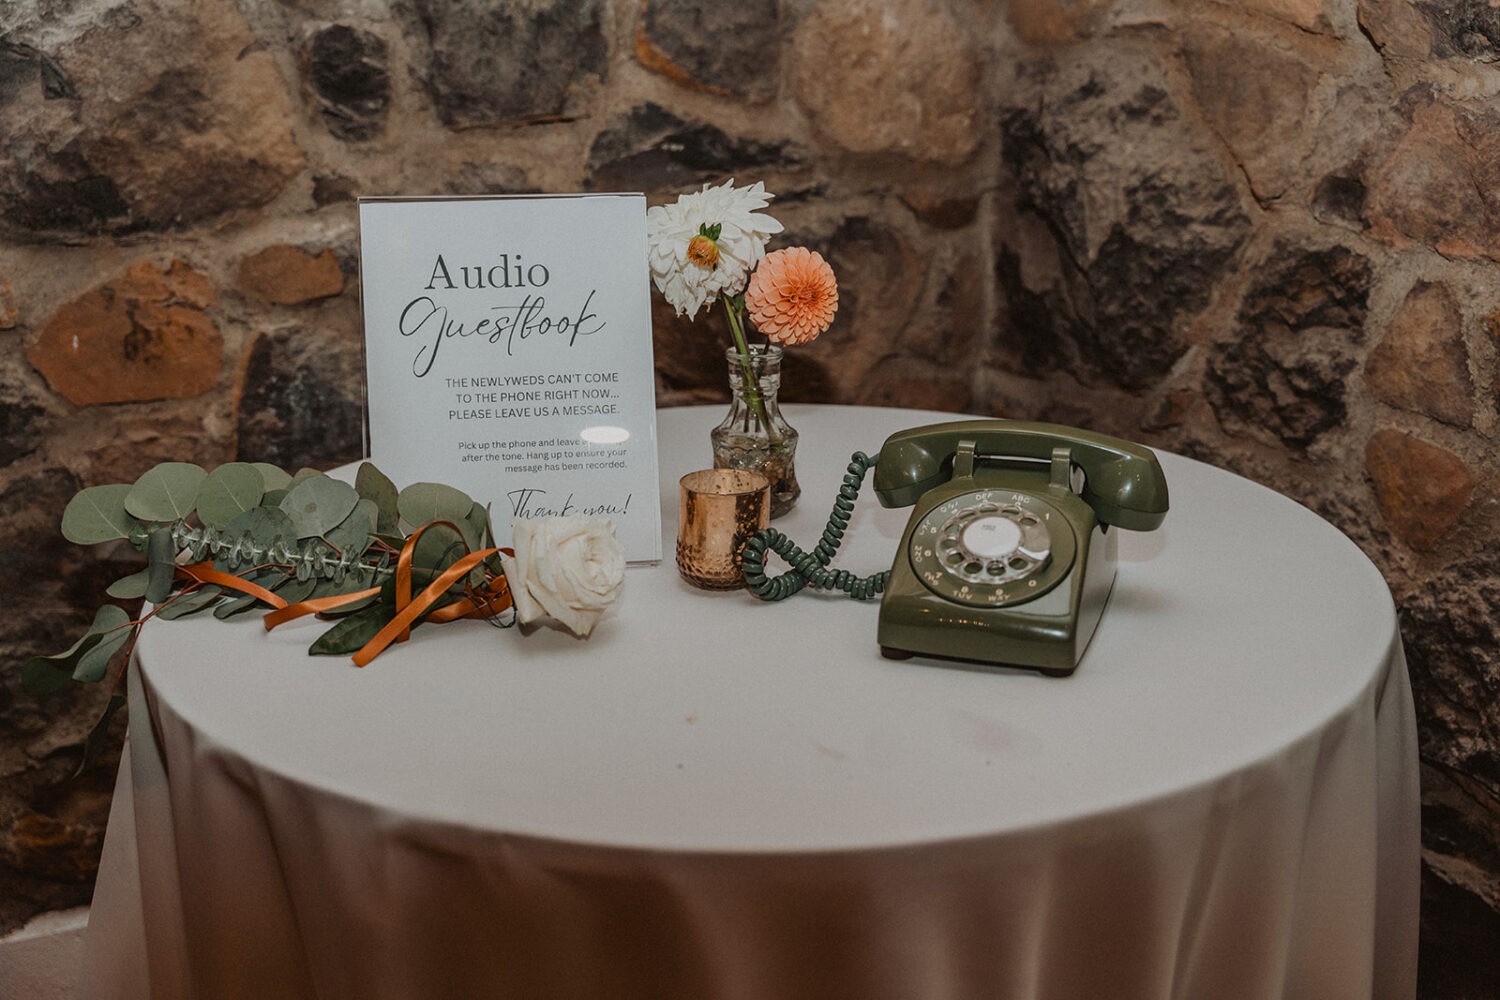 audio guestbook vintage phone on table at wedding reception